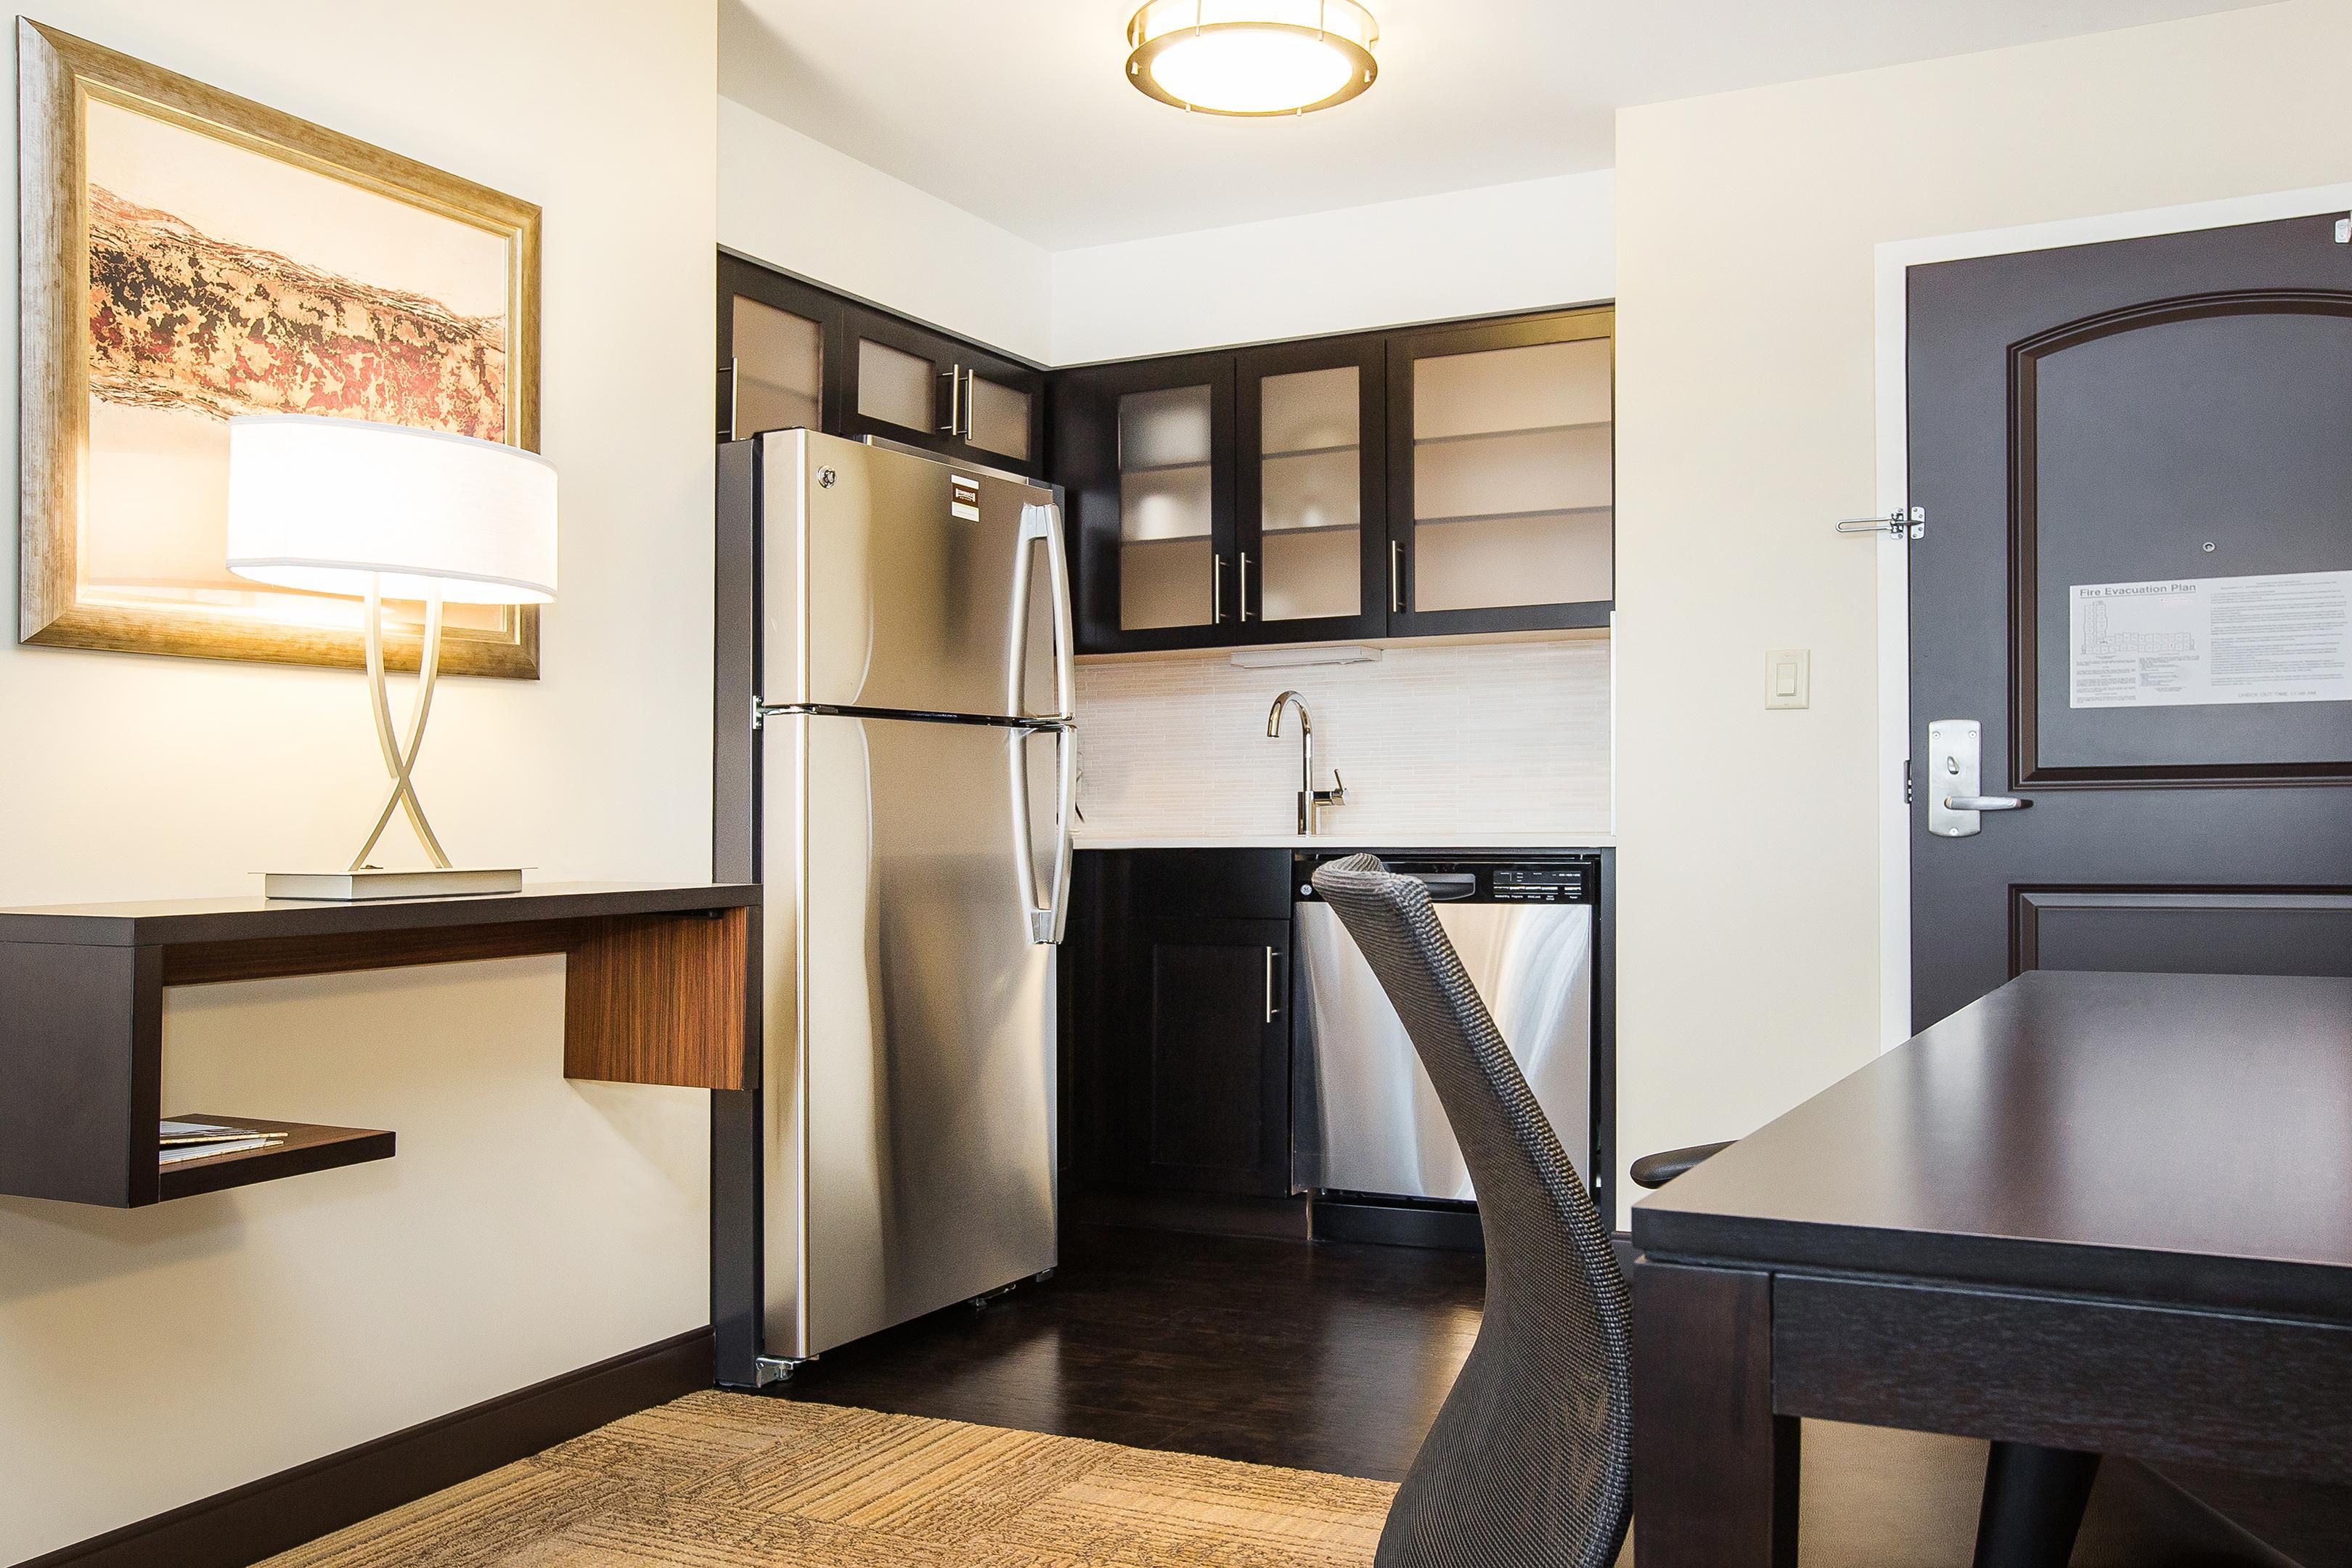 The longer you stay, the less you pay! Staybridge Suites West Edmonton offers extended stay comfort with all of our suites offering fully equipped kitchens, spacious bathrooms, comfortable plush bedding and additional living room space. Contact us today to inquire about our extended stay rates. Arrive a stranger, leave as family